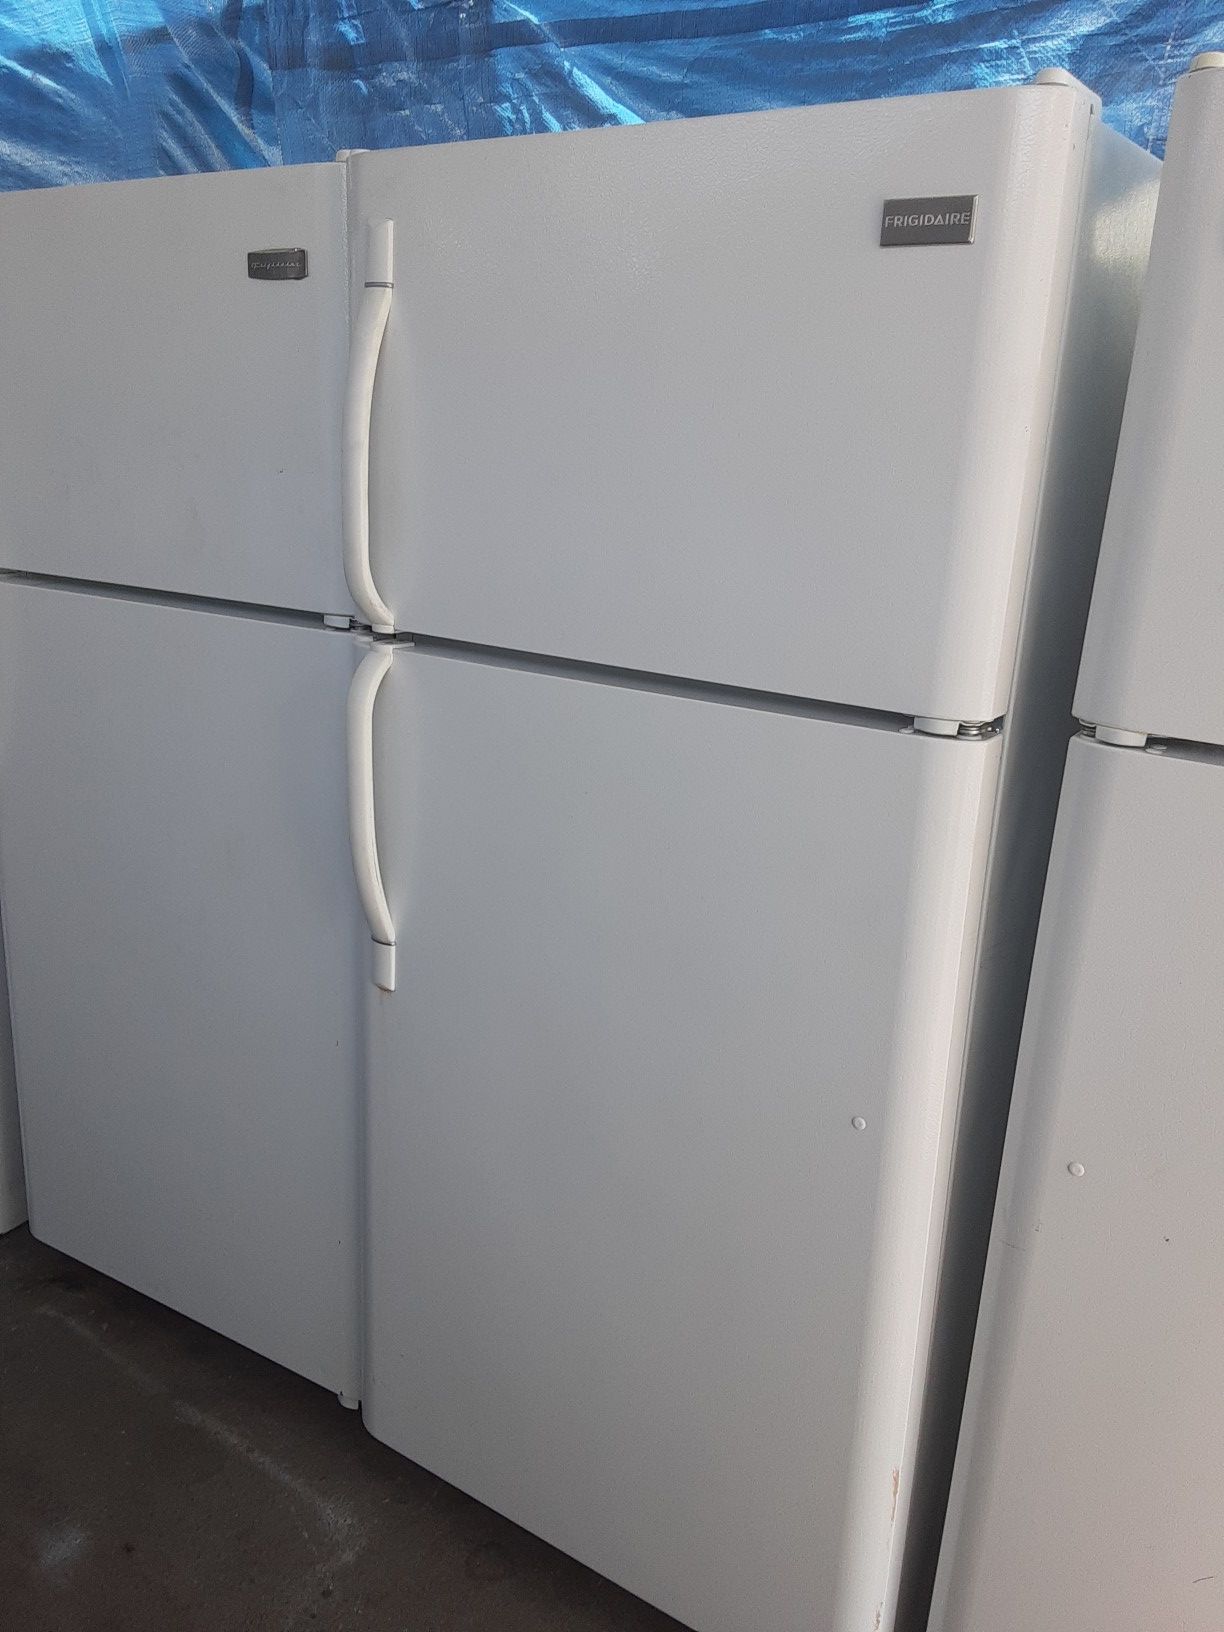 $265 white Frigidaire 18 cubic fridge includes delivery in the San Fernando Valley a warranty and installation